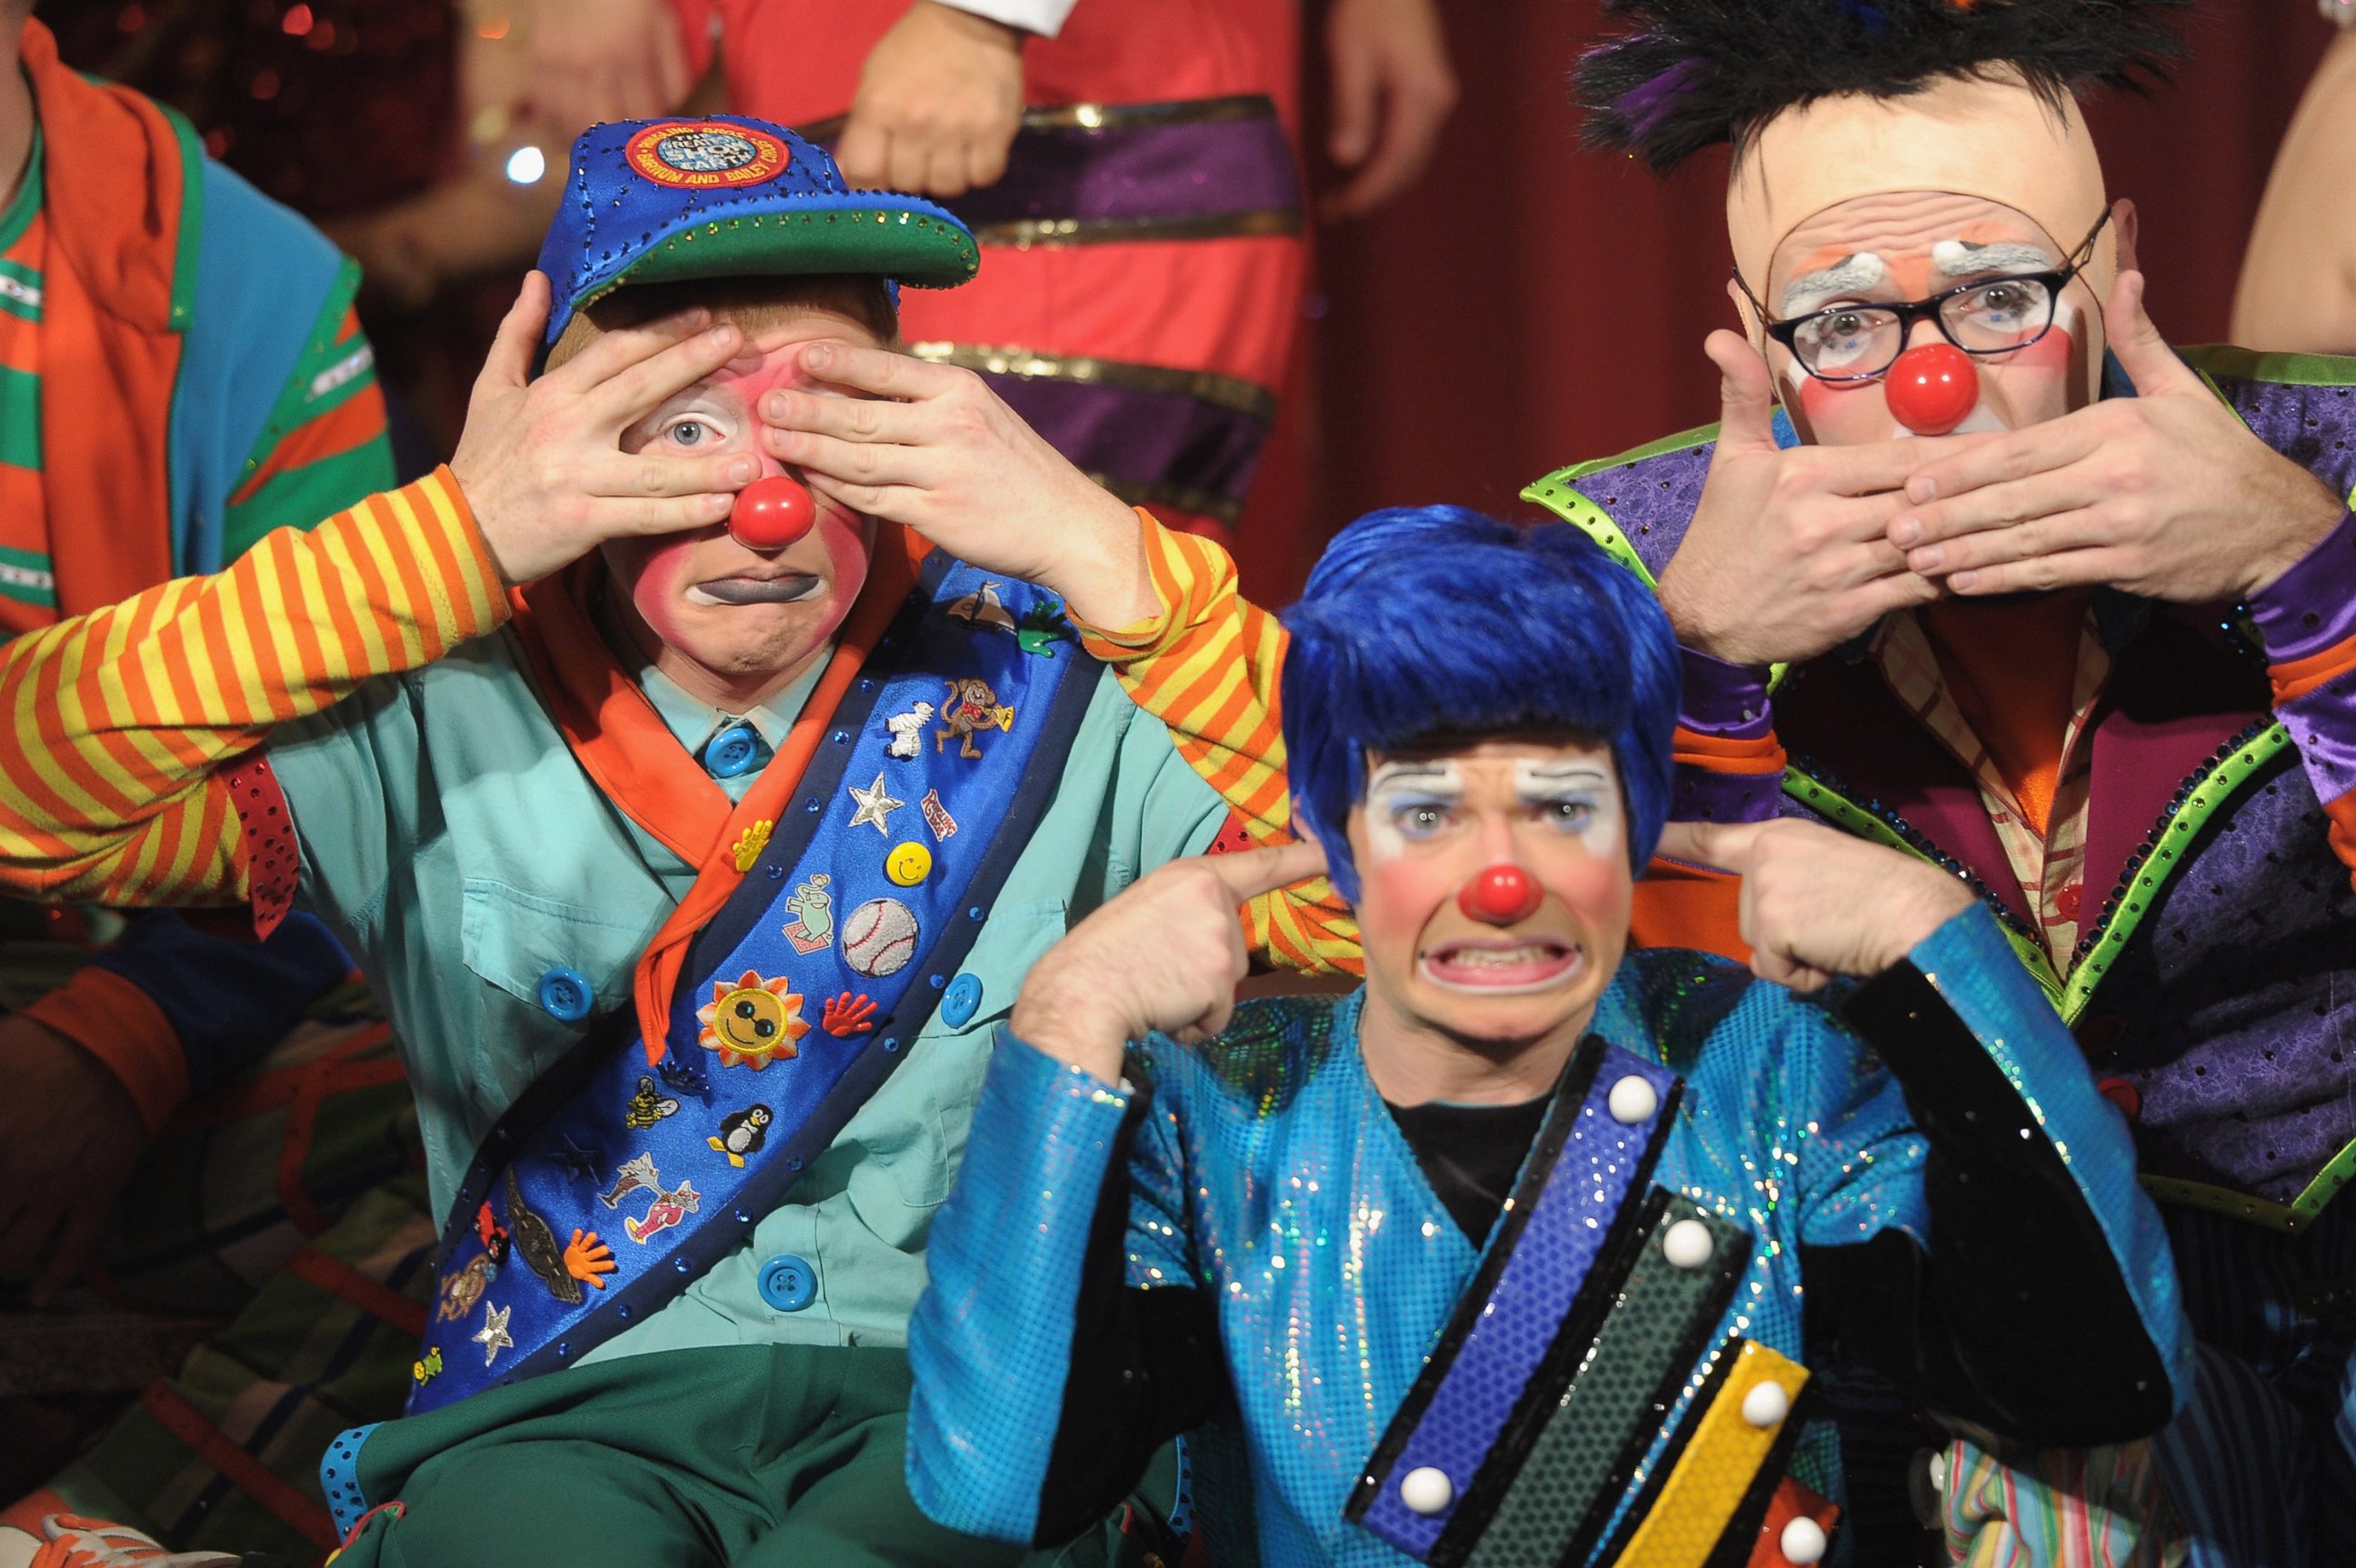 PHOTO: Clowns participate in Ringling Bros. and Barnum & Bailey's sneak peak of their new national touring show at Grand Central Terminal on Feb. 28, 2012 in New York. 